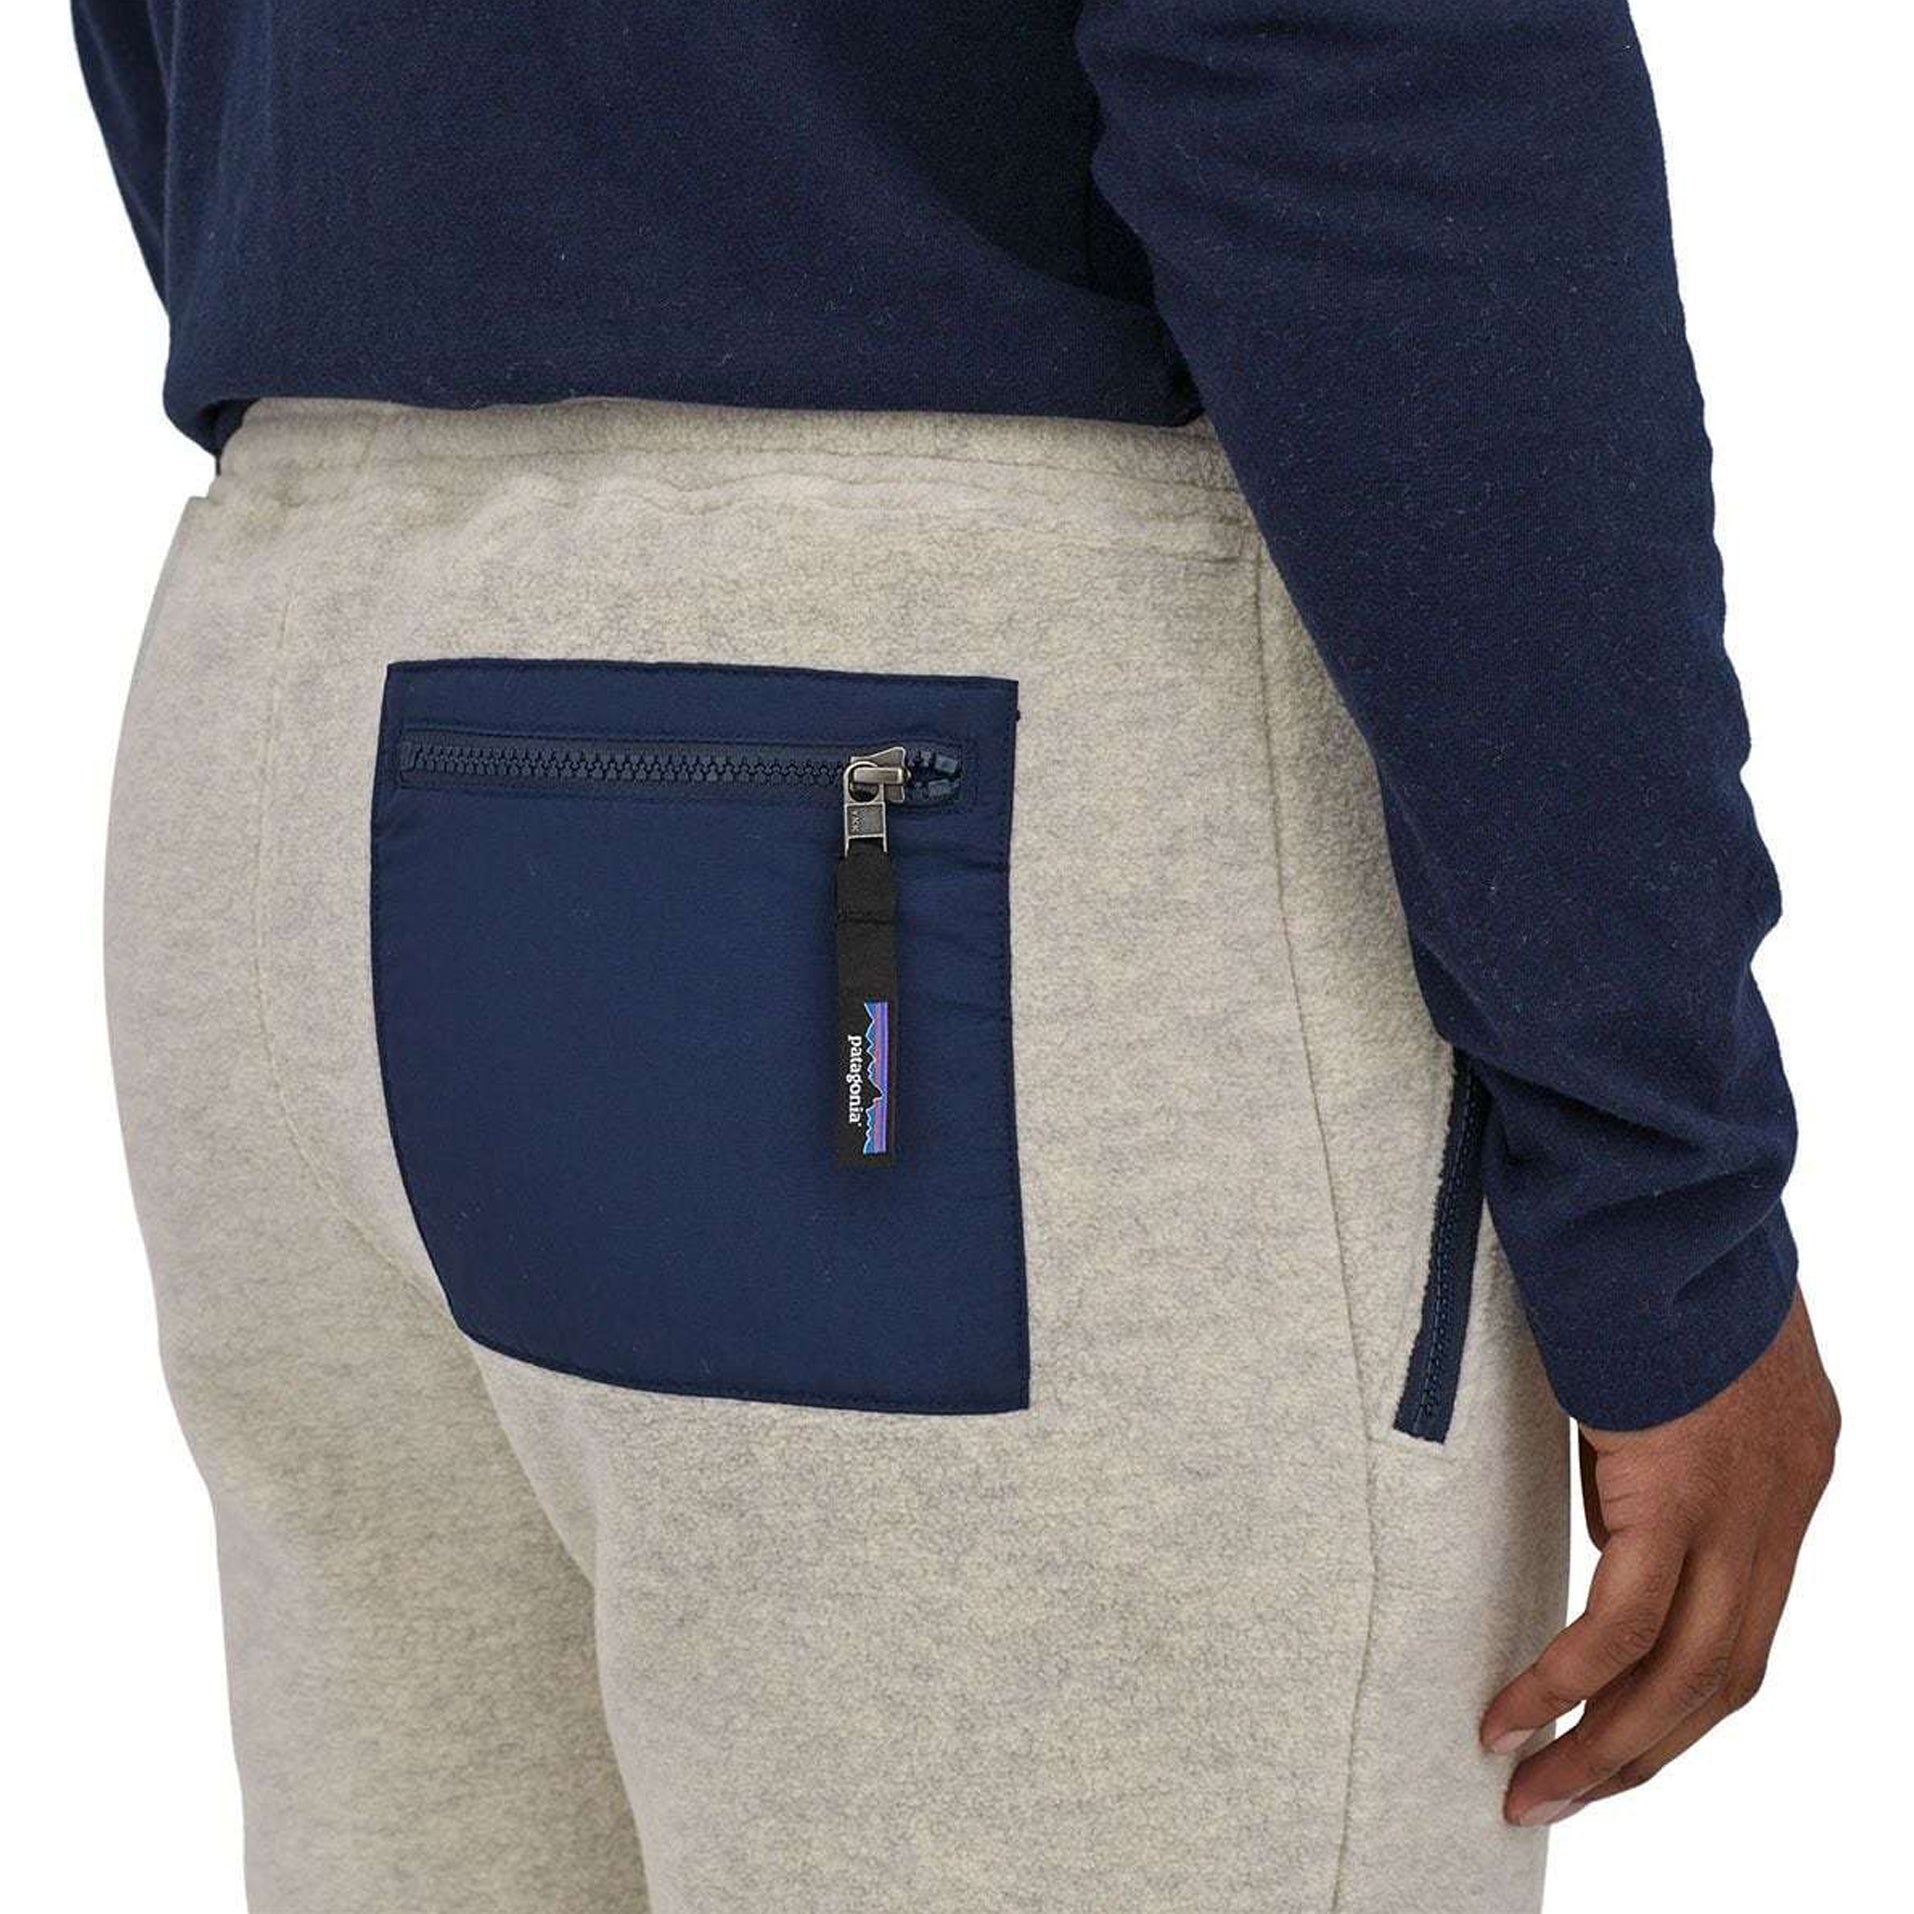 Synch Pants OATMEAL HEATHER
Warm, comfortable 100% recycled polyester fleece pants with a back pocket and an elasticized waistband. Inseam is 30&quot;. Fair Trade Certified™ sewn. PATAGONIA